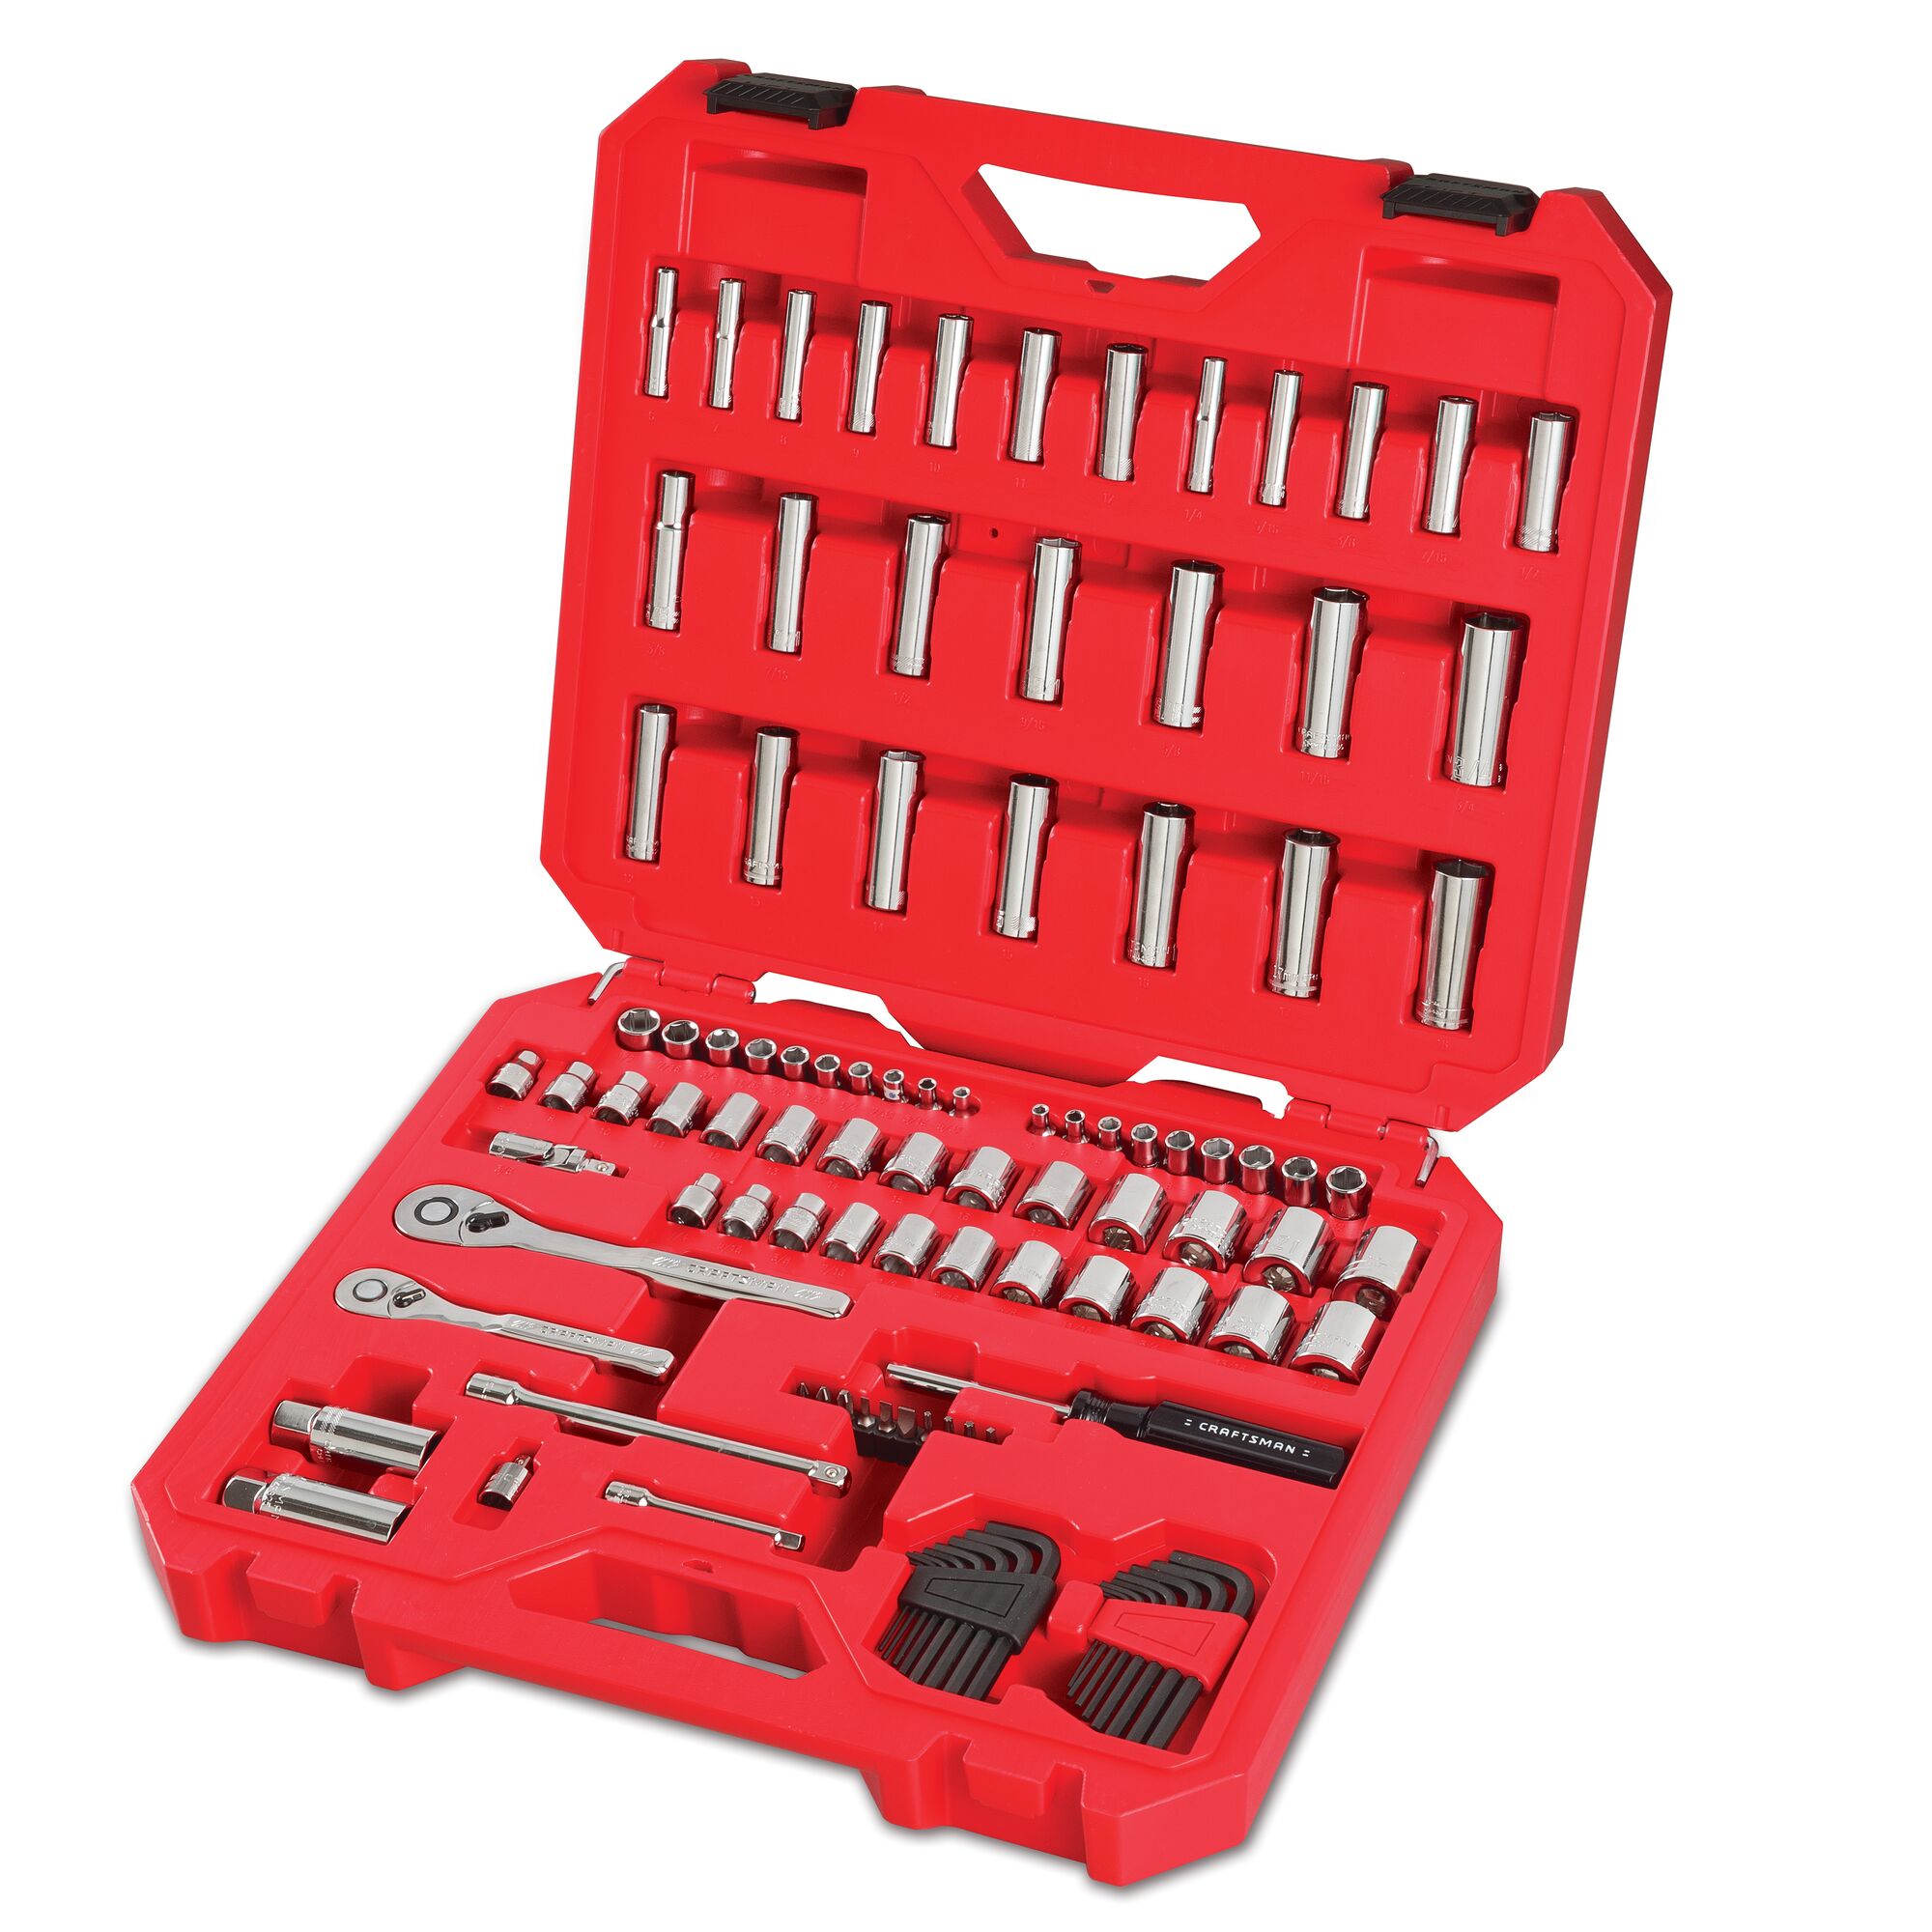 105 piece quarter inch and 3 eighths inch drive mechanics tool set in case.